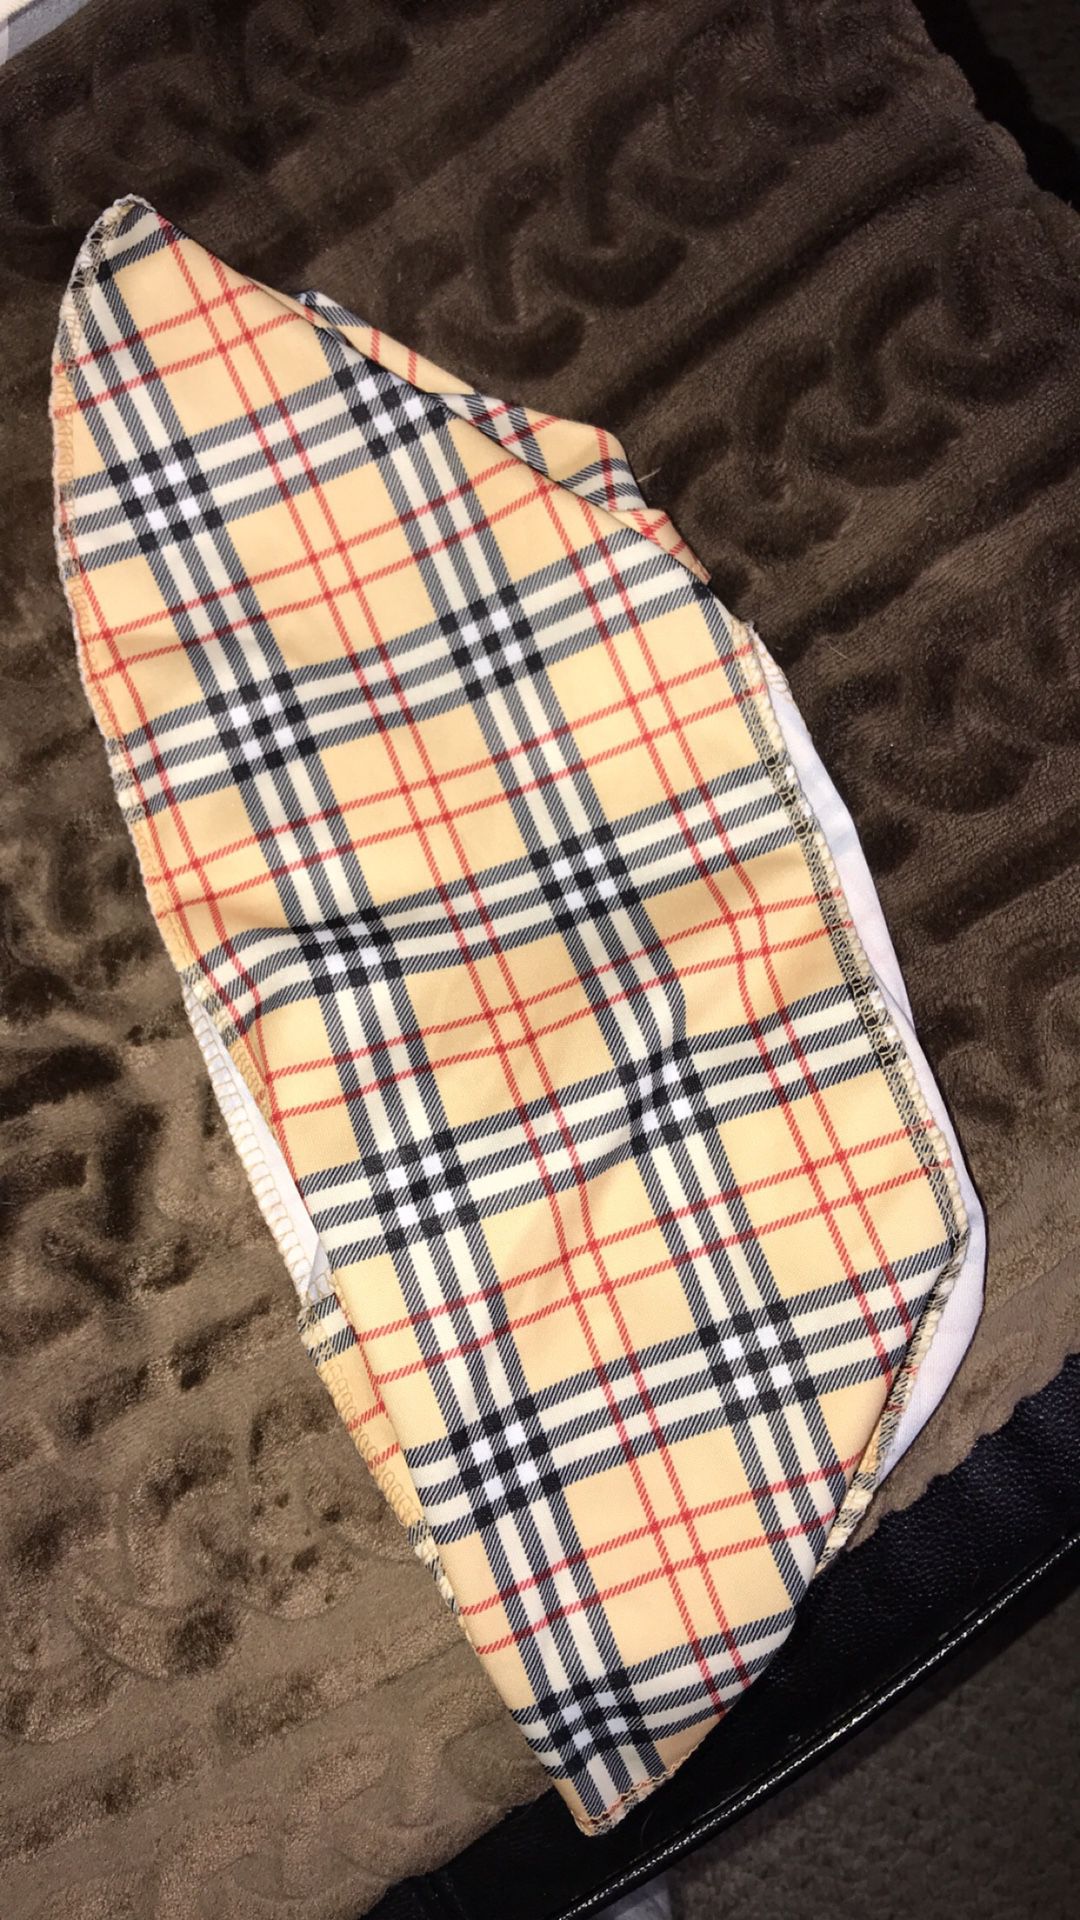 New Burberry PRINT Durag. (Burberry does not make durags)